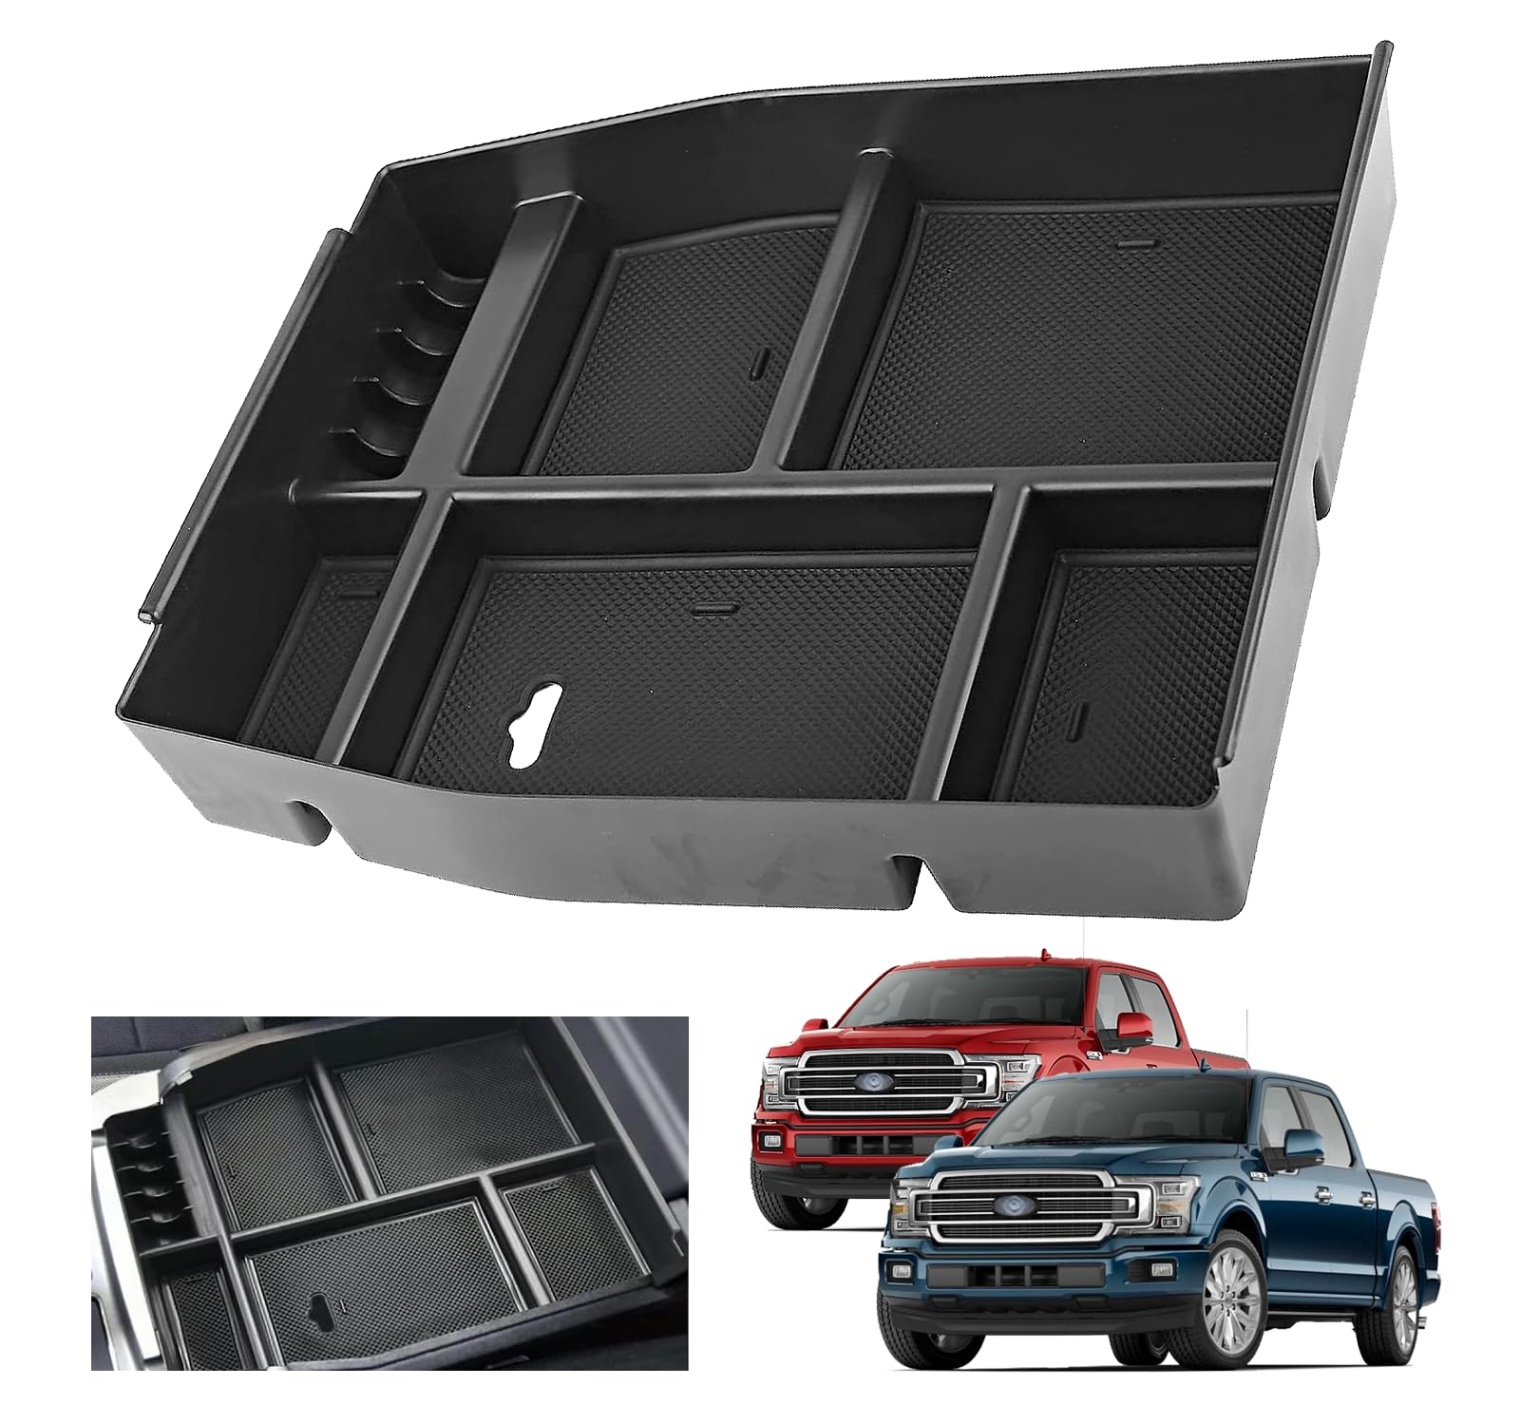 2018 f150 accessories Niche Utama Home  F Console Tray Center Console Organizer Tray for - Ford  F- Raptor Mid Armrest Glove Storage Box for Ford F  Accessories  NOT